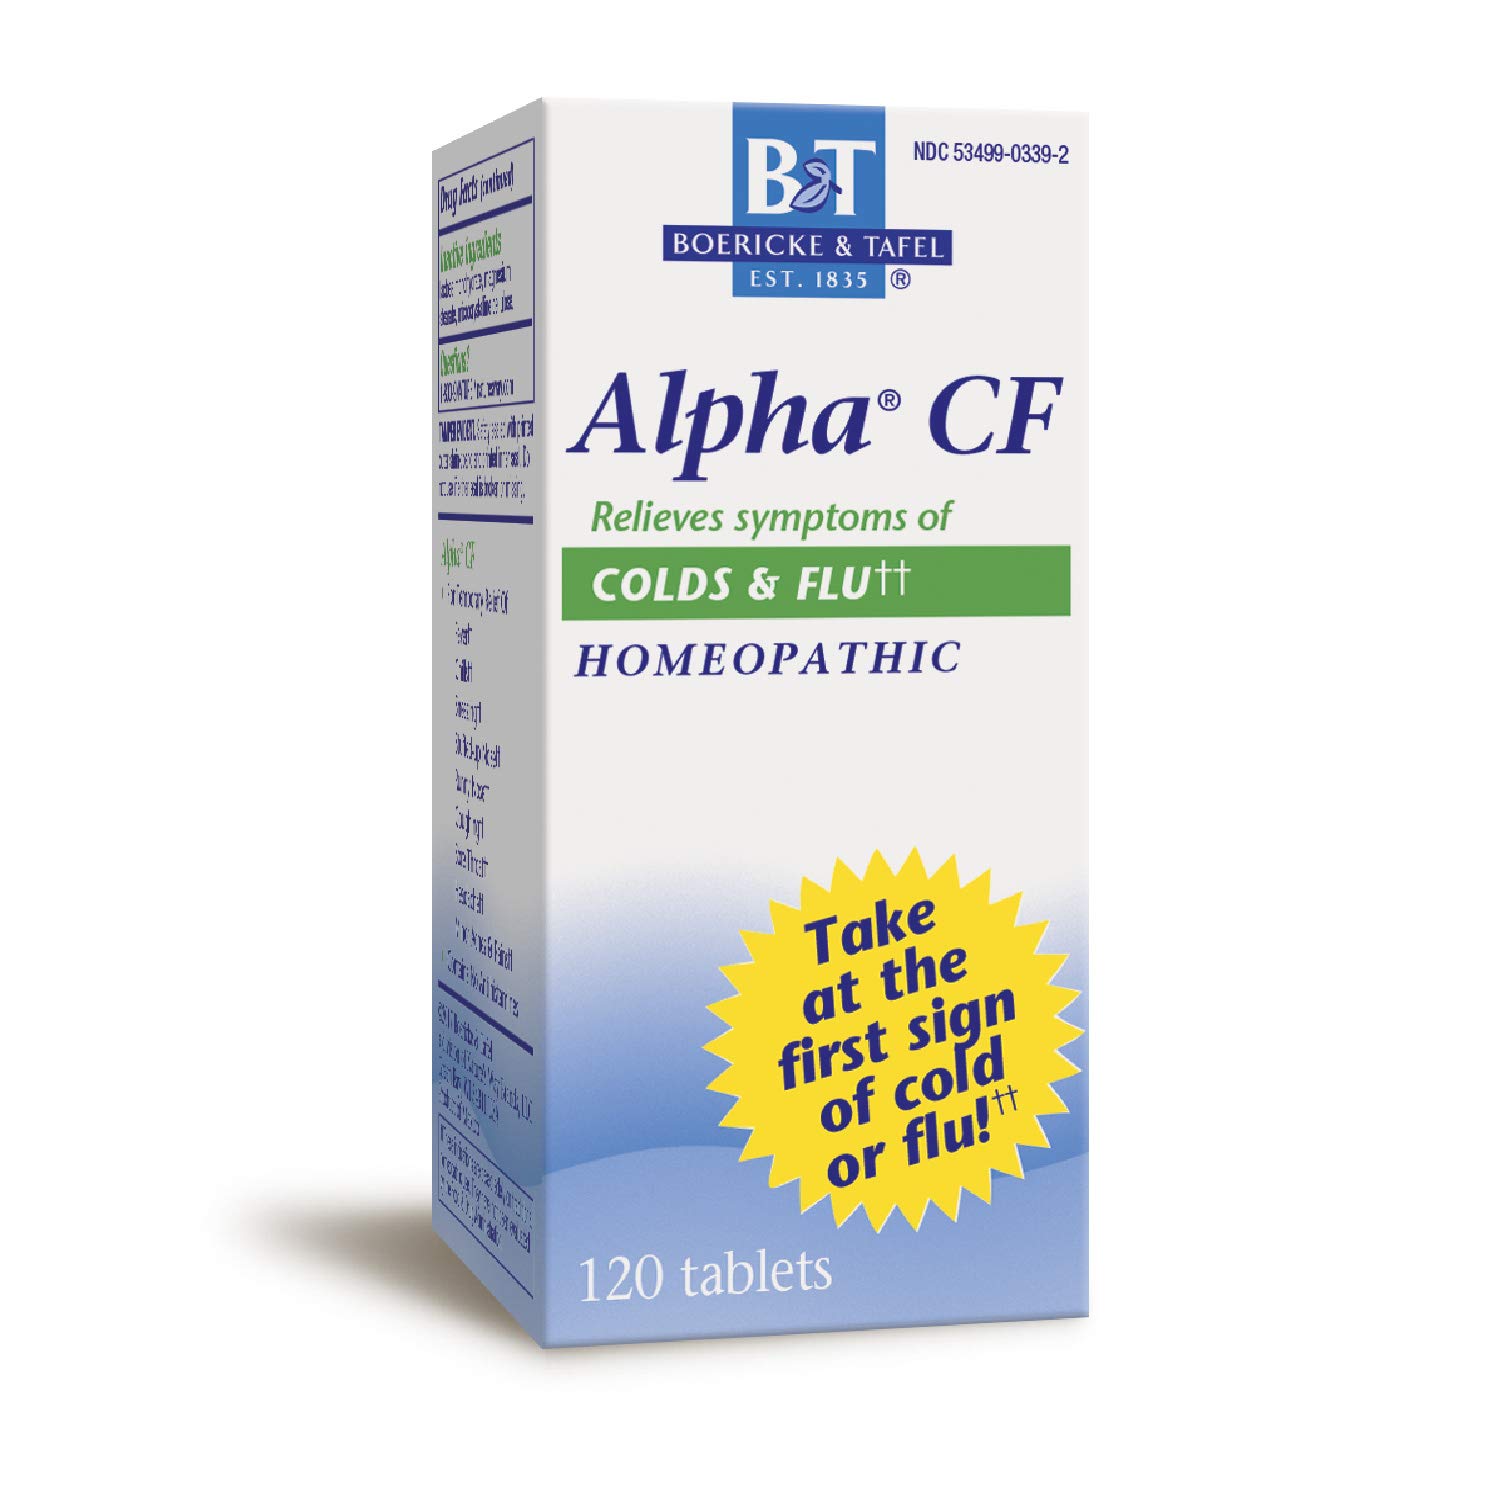 Boericke & Tafel Alpha CF Homeopathic Colds & Flu Symptom Relief, Nature's Way Brands, 120 Tablets